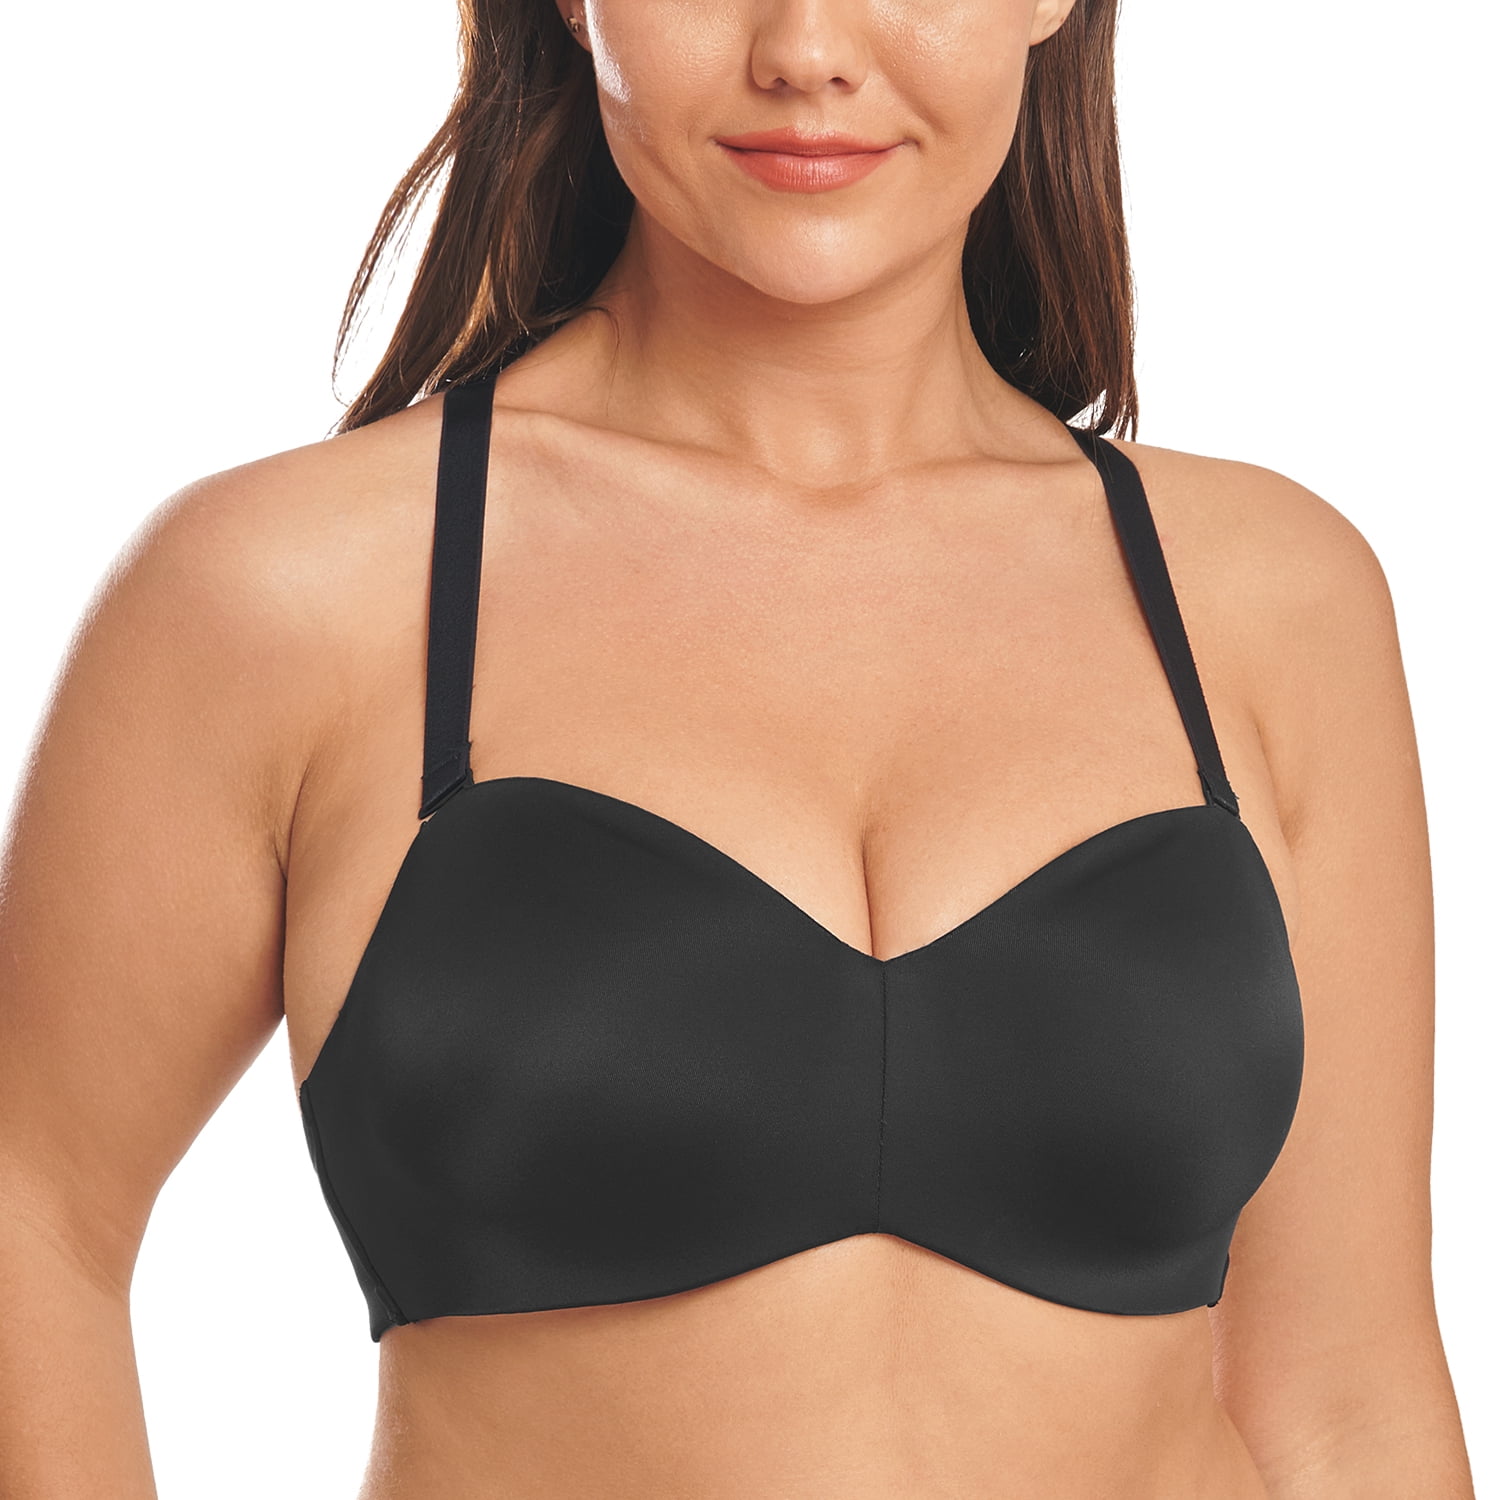 38c bra new Size undefined - $10 New With Tags - From Toni